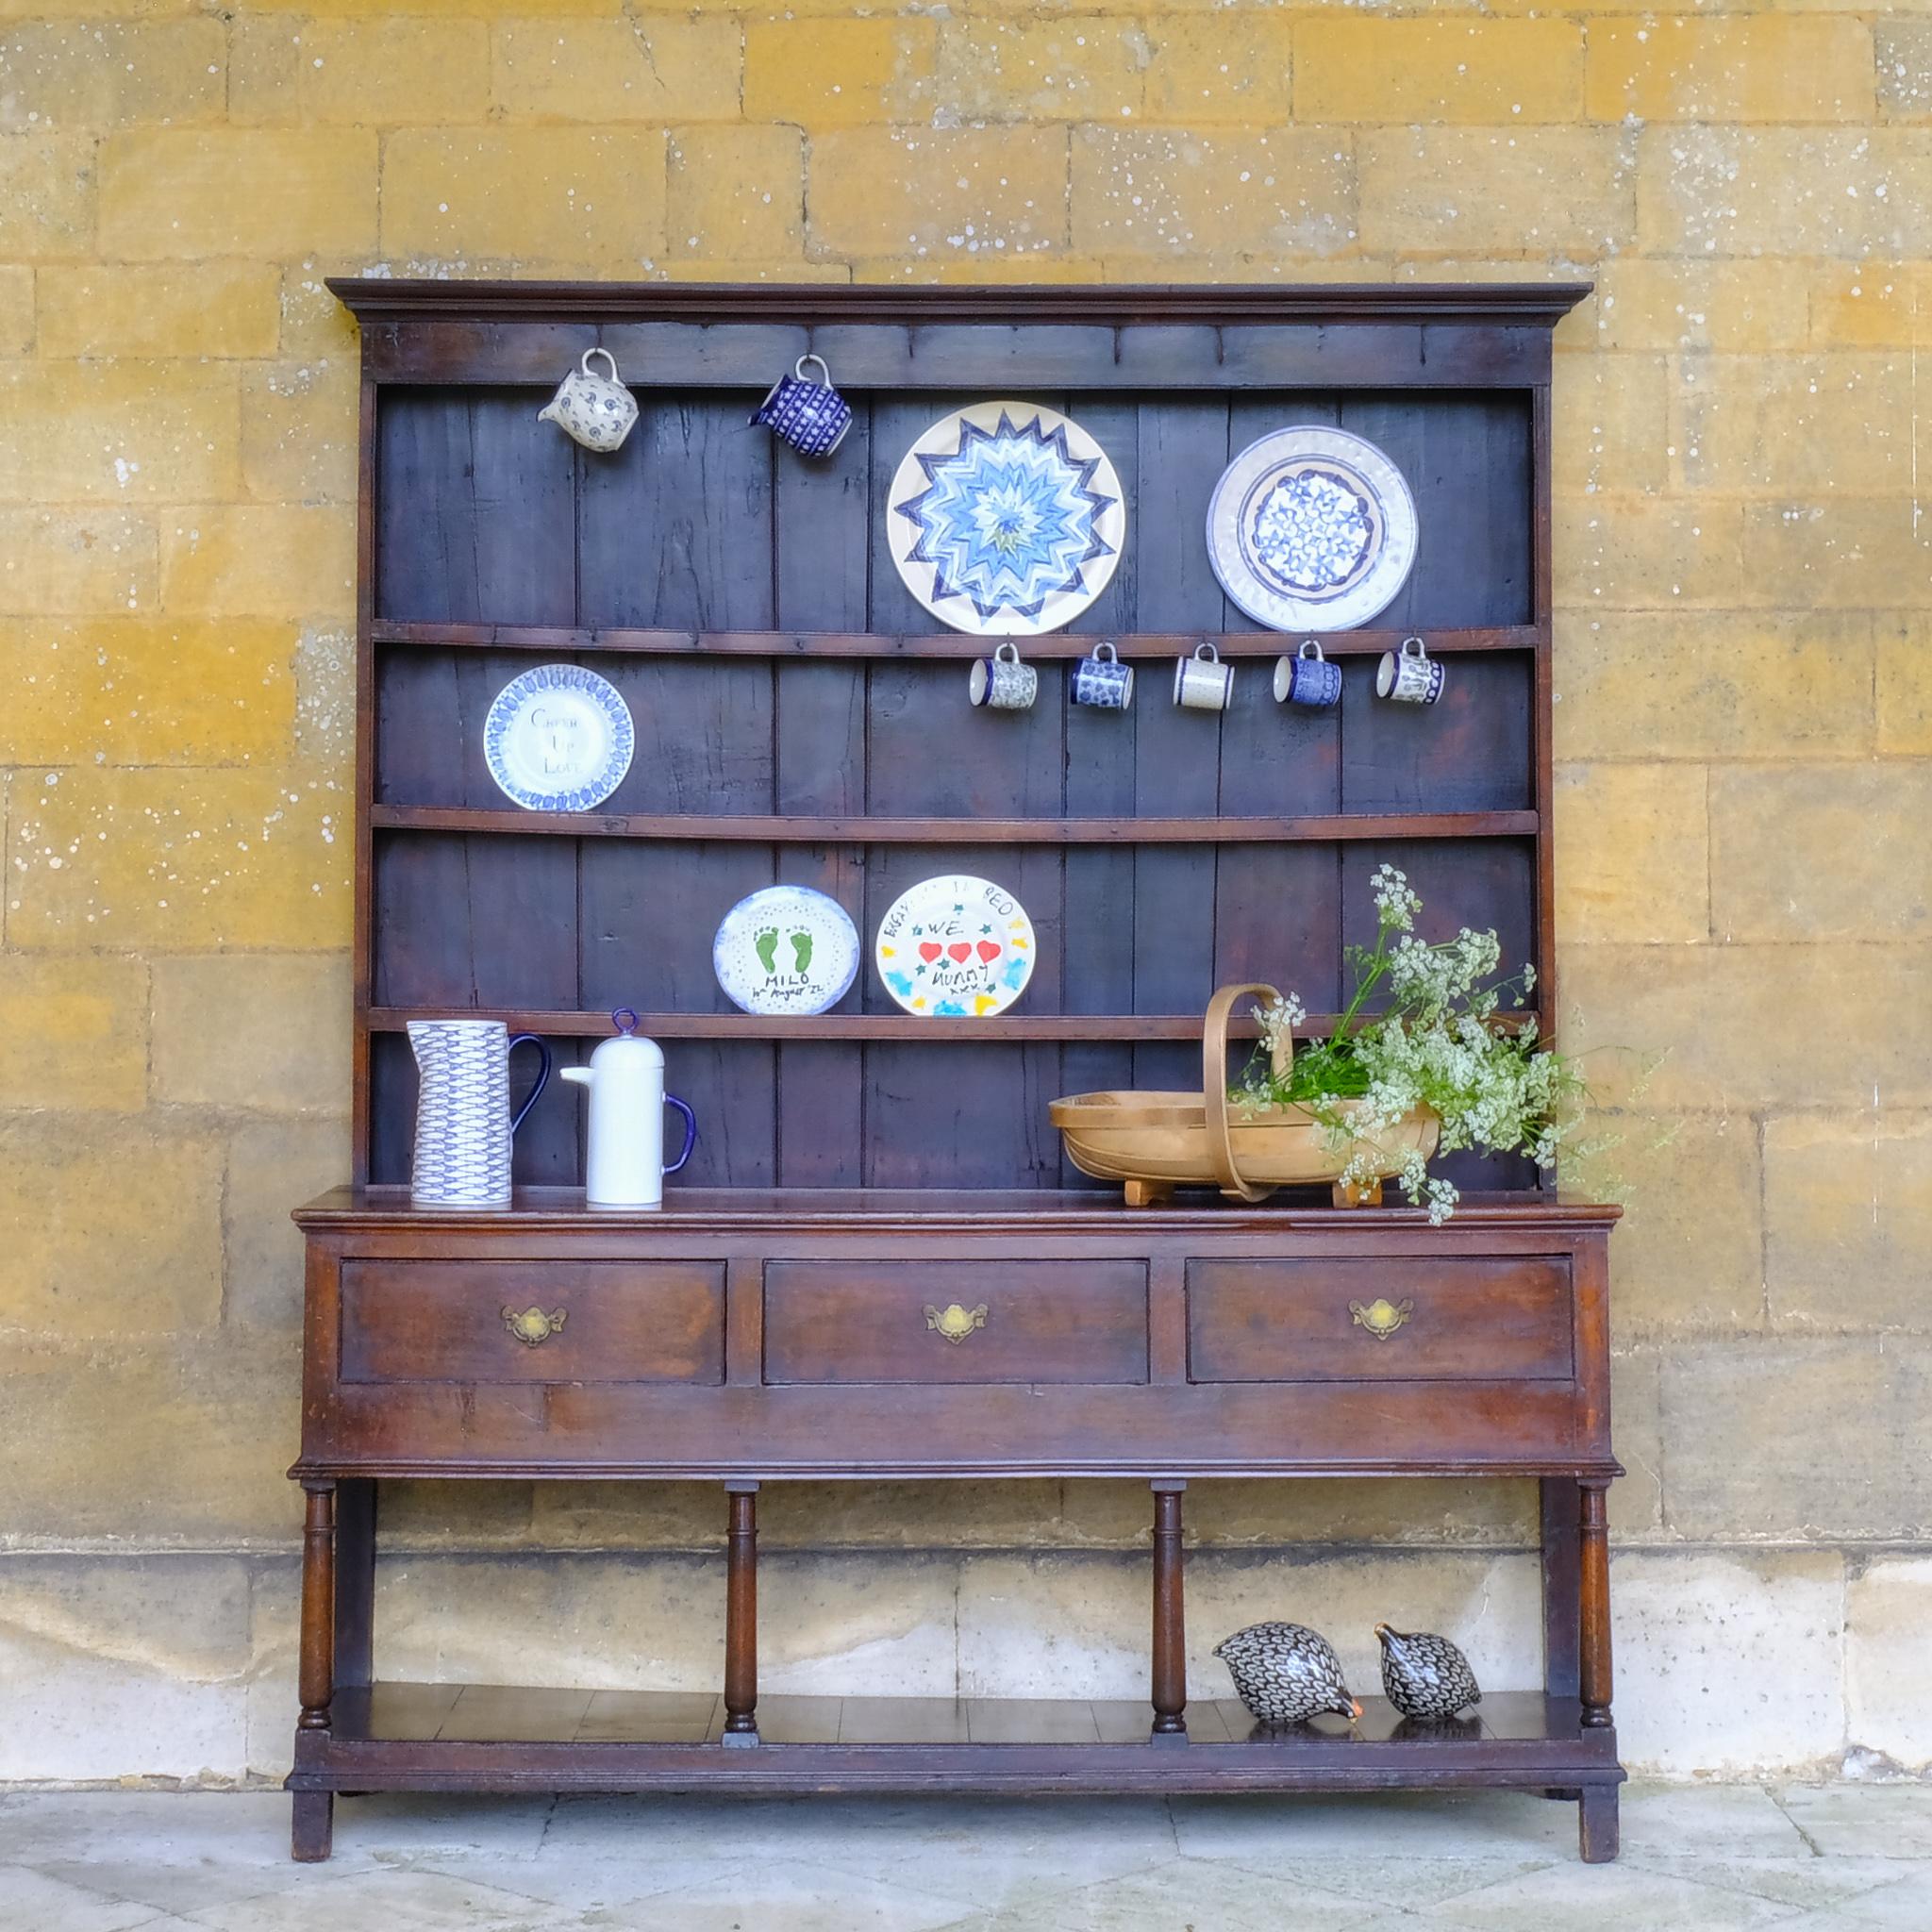 A large 18th century Welsh oak dresser in a beautiful, rich colour, with boarded plate shelves over a three drawer base raised on four elegantly turned supports with a boarded lower shelf. Various hooks along the upper shelf and top. Comes in two